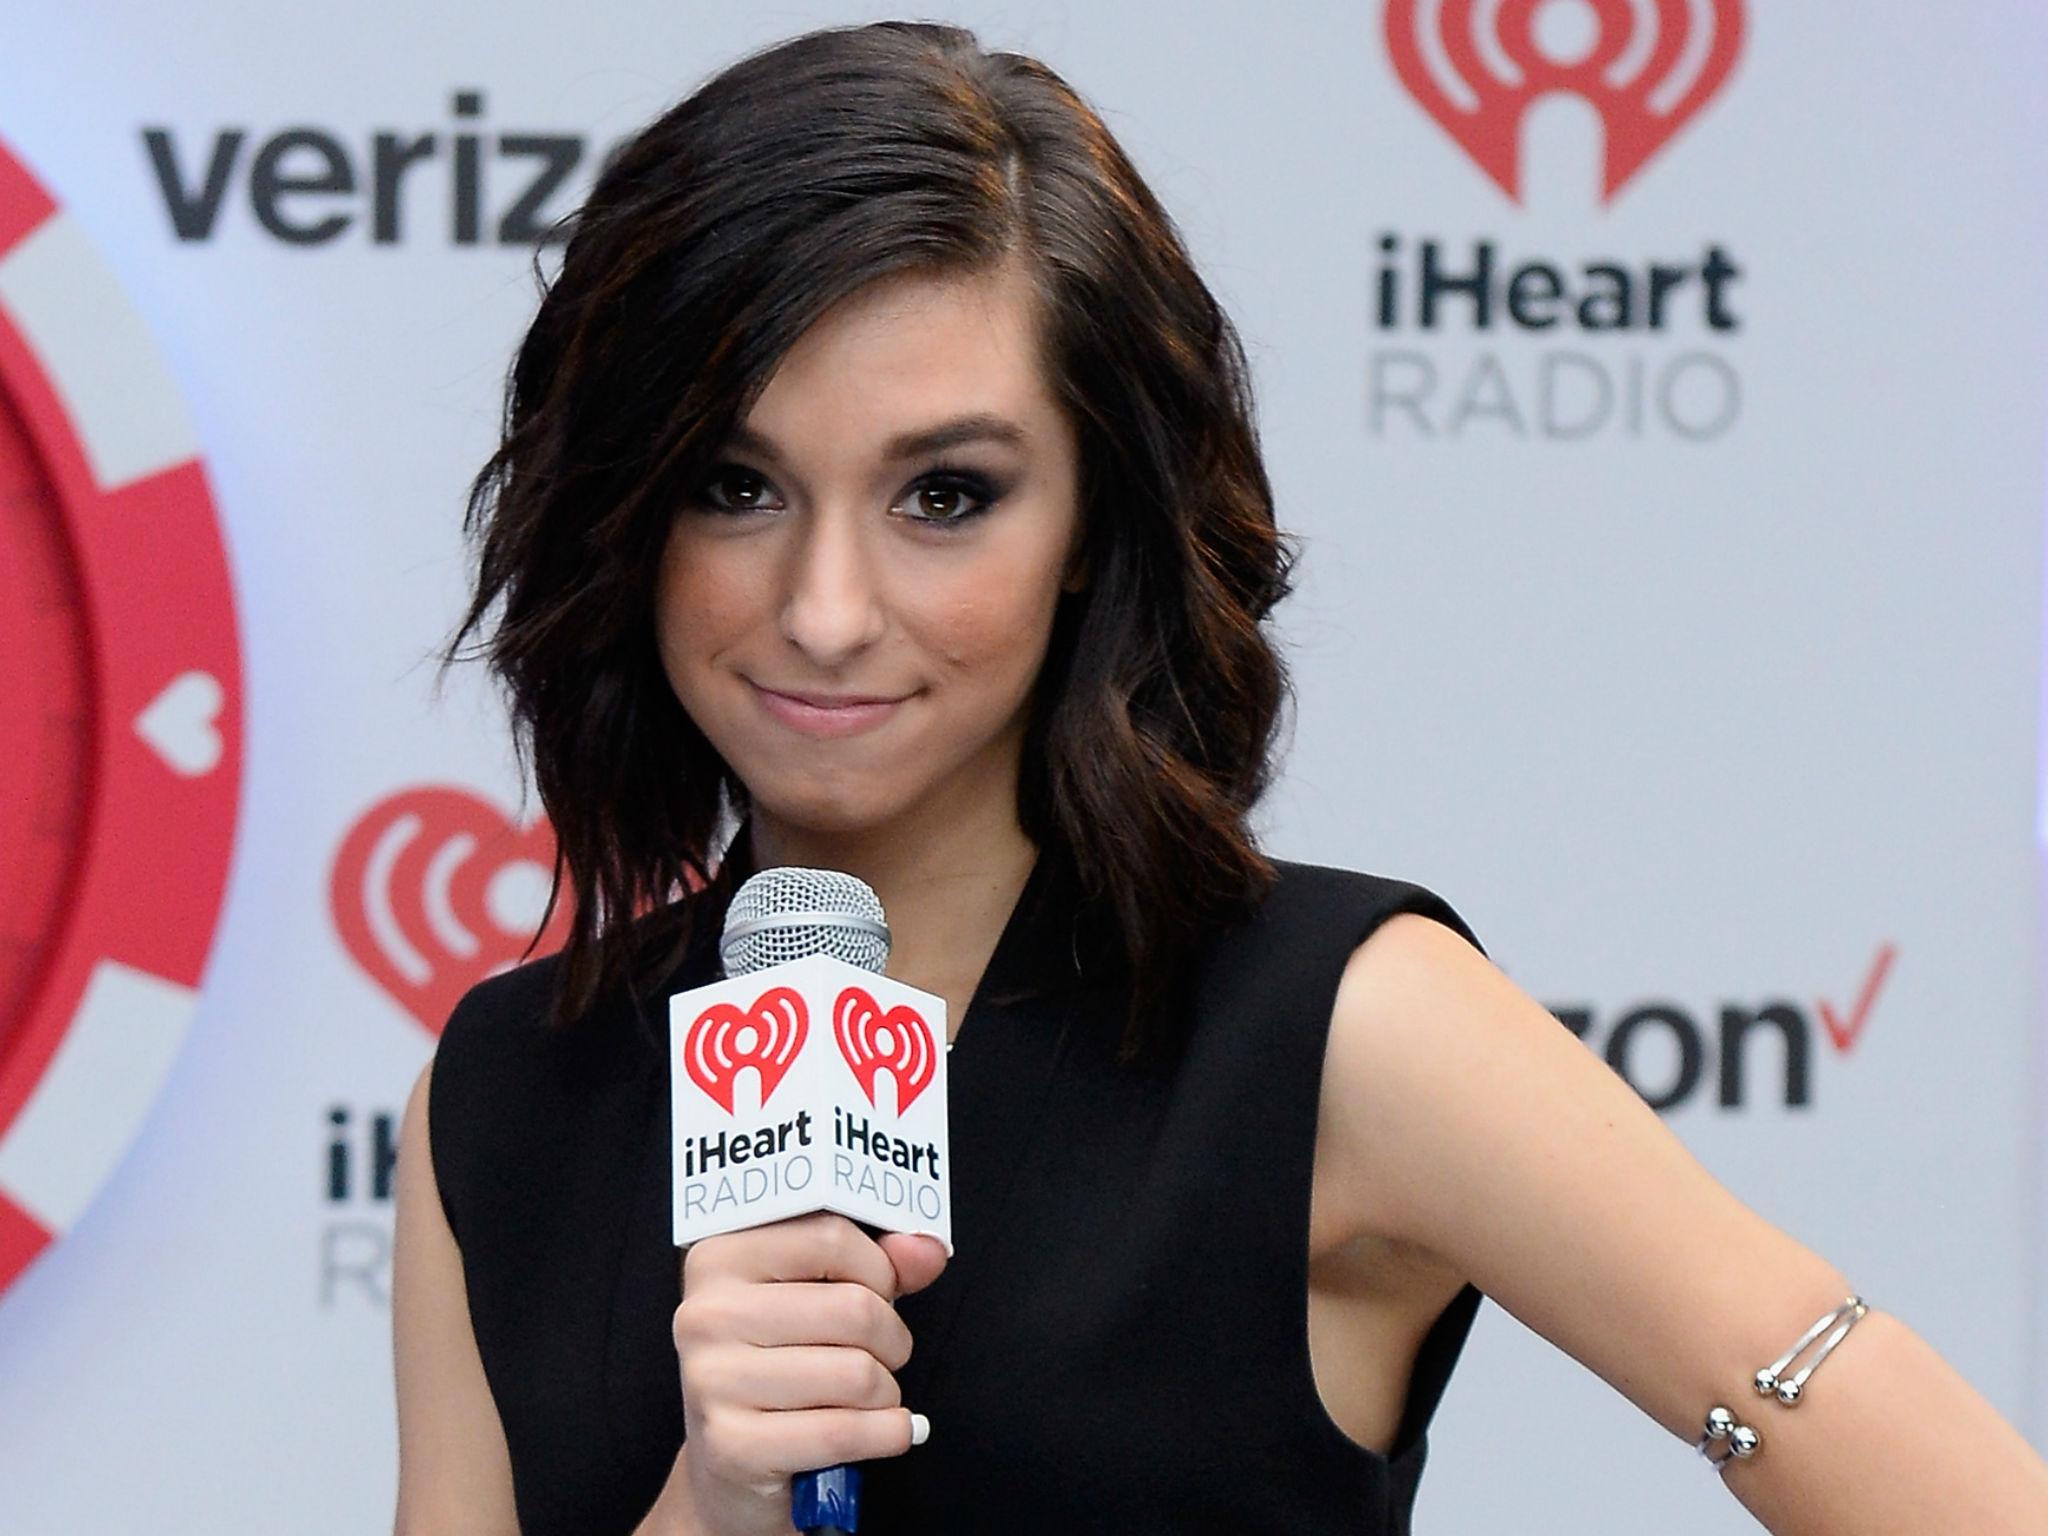 Christina Grimmie The Voice Singer S Killer Had A History Of Violence The Independent The